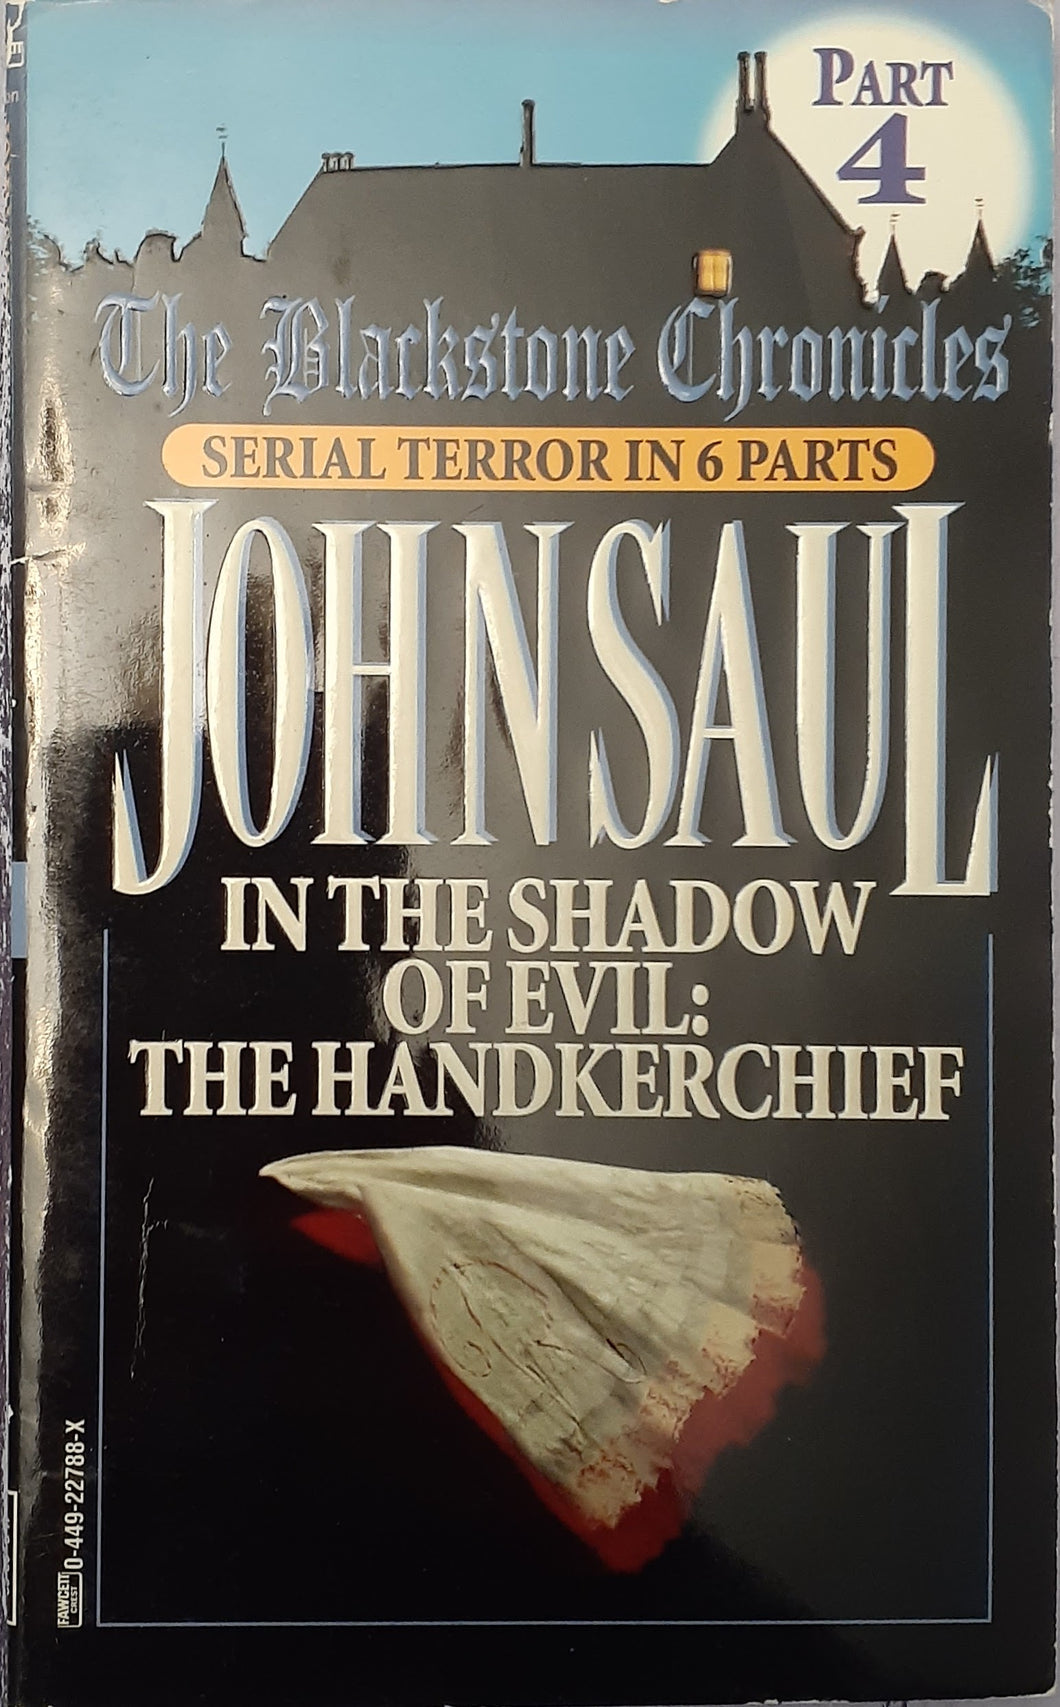 The Blackstone Chronicles - In the Shadow of Evil : The Handkerchief